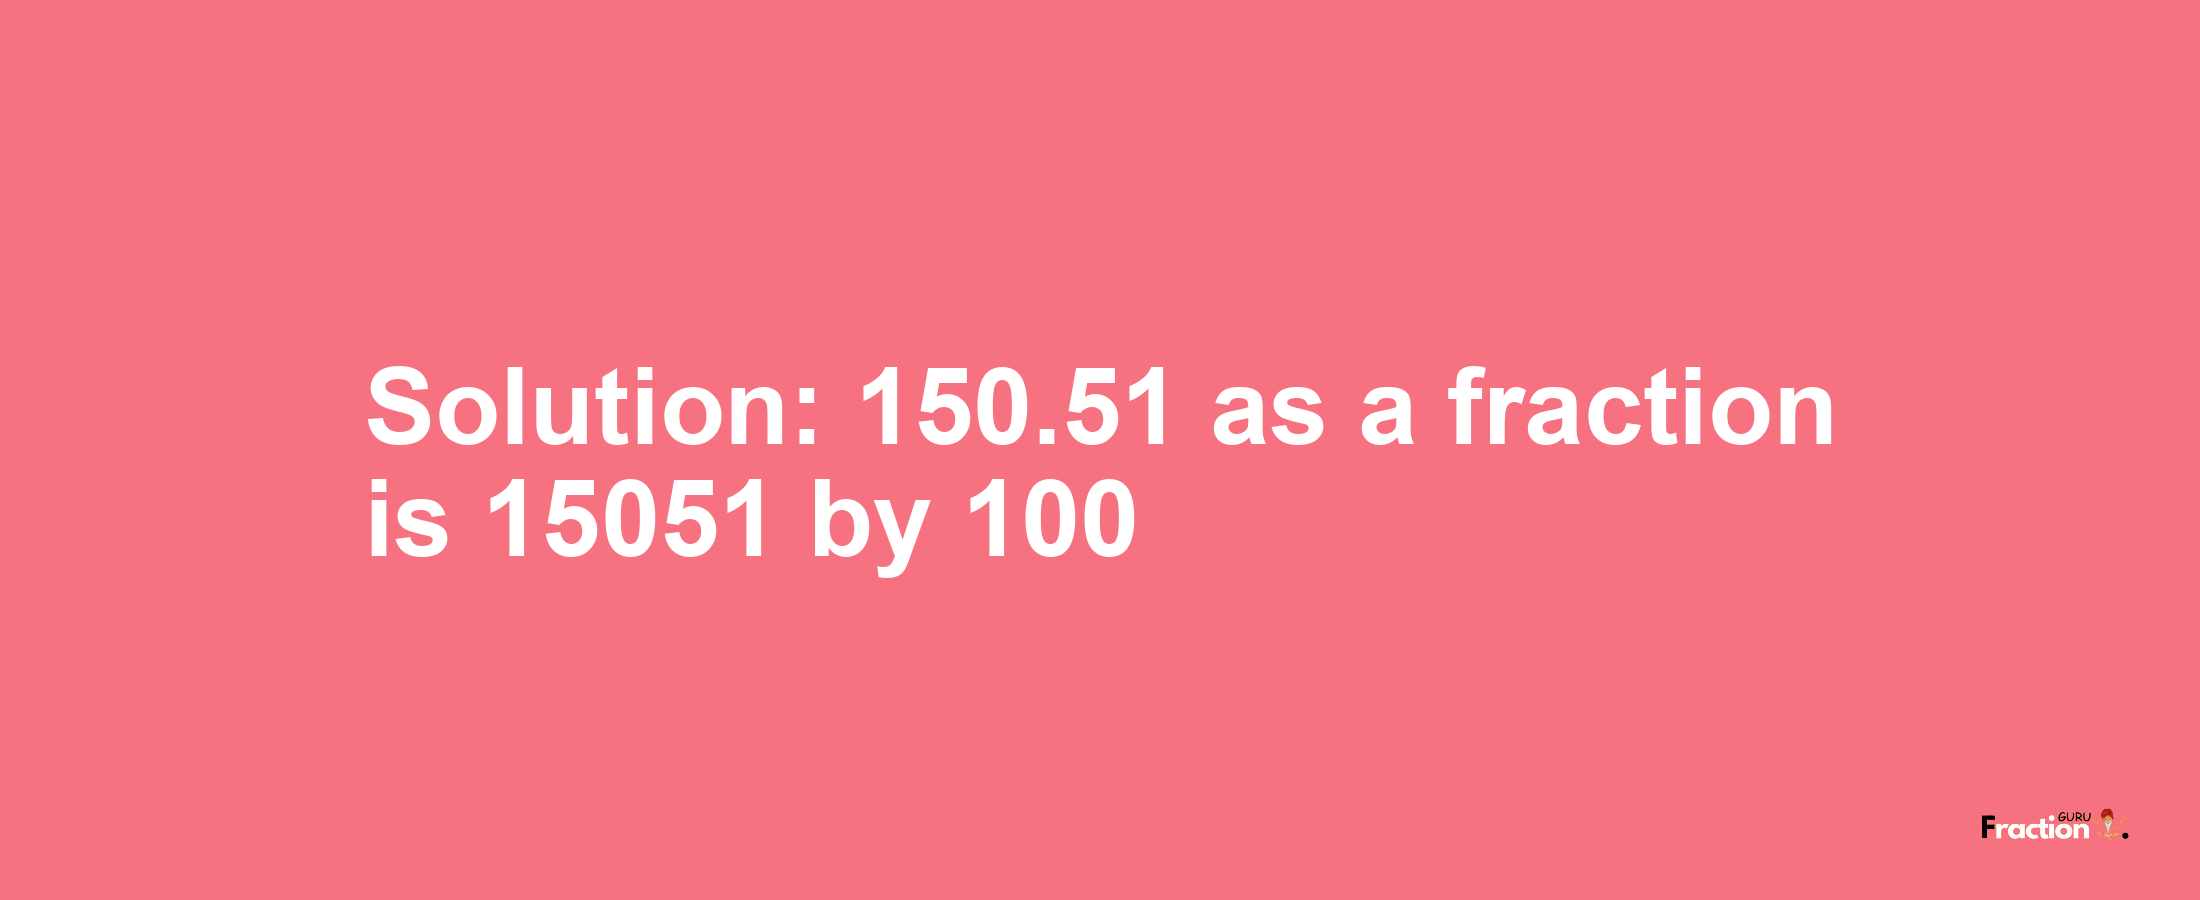 Solution:150.51 as a fraction is 15051/100